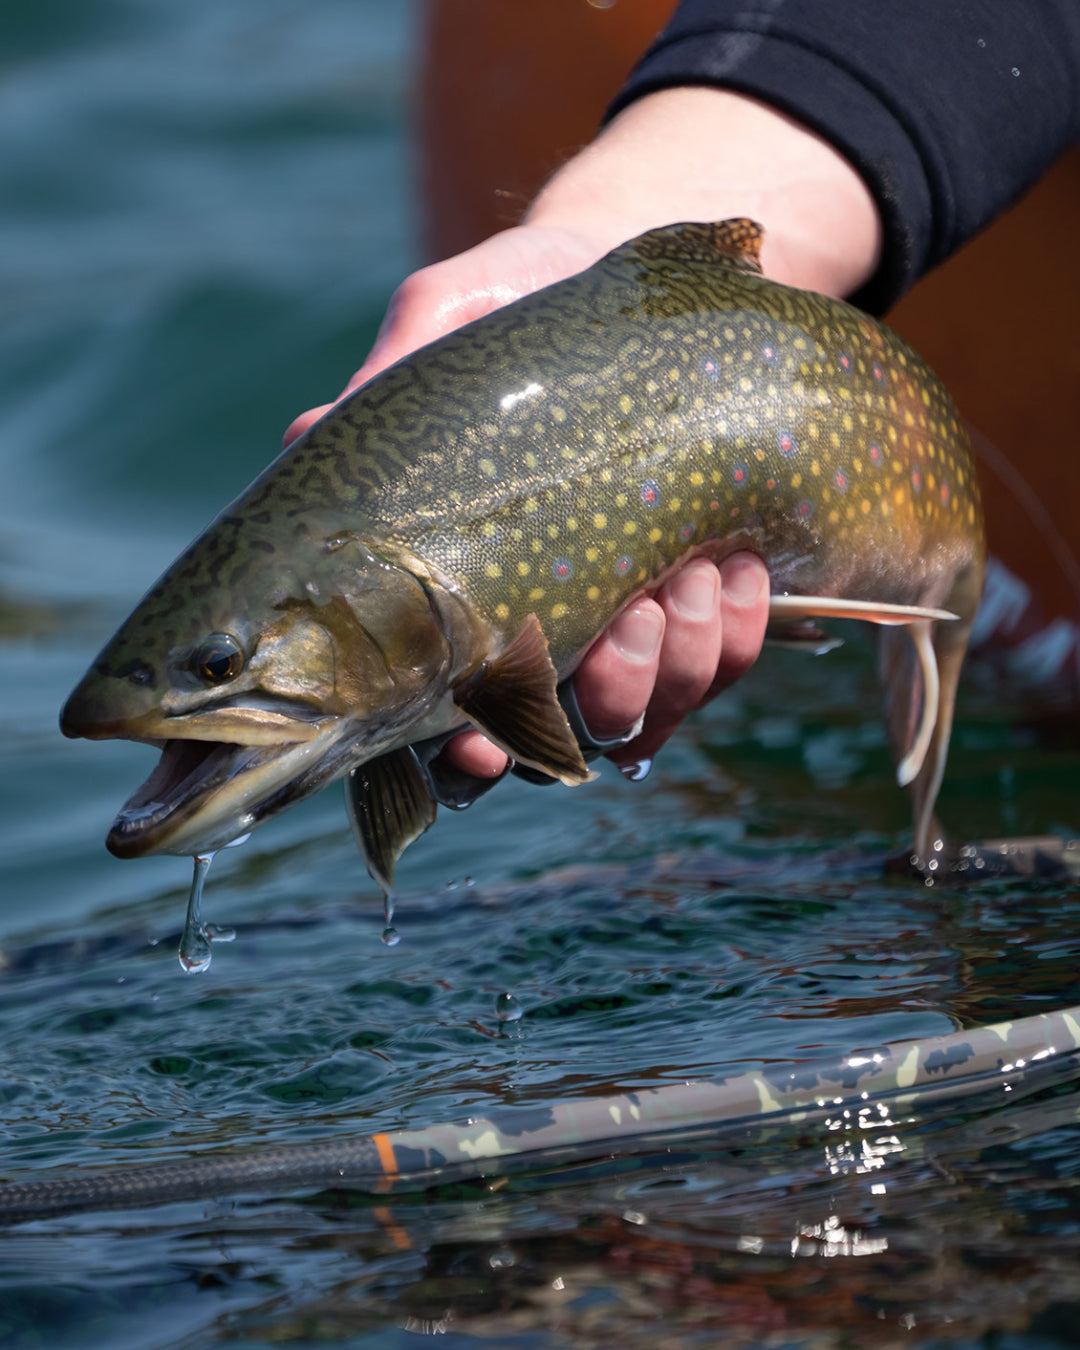 Fly Fishing Clearance Sale & Closeout Items